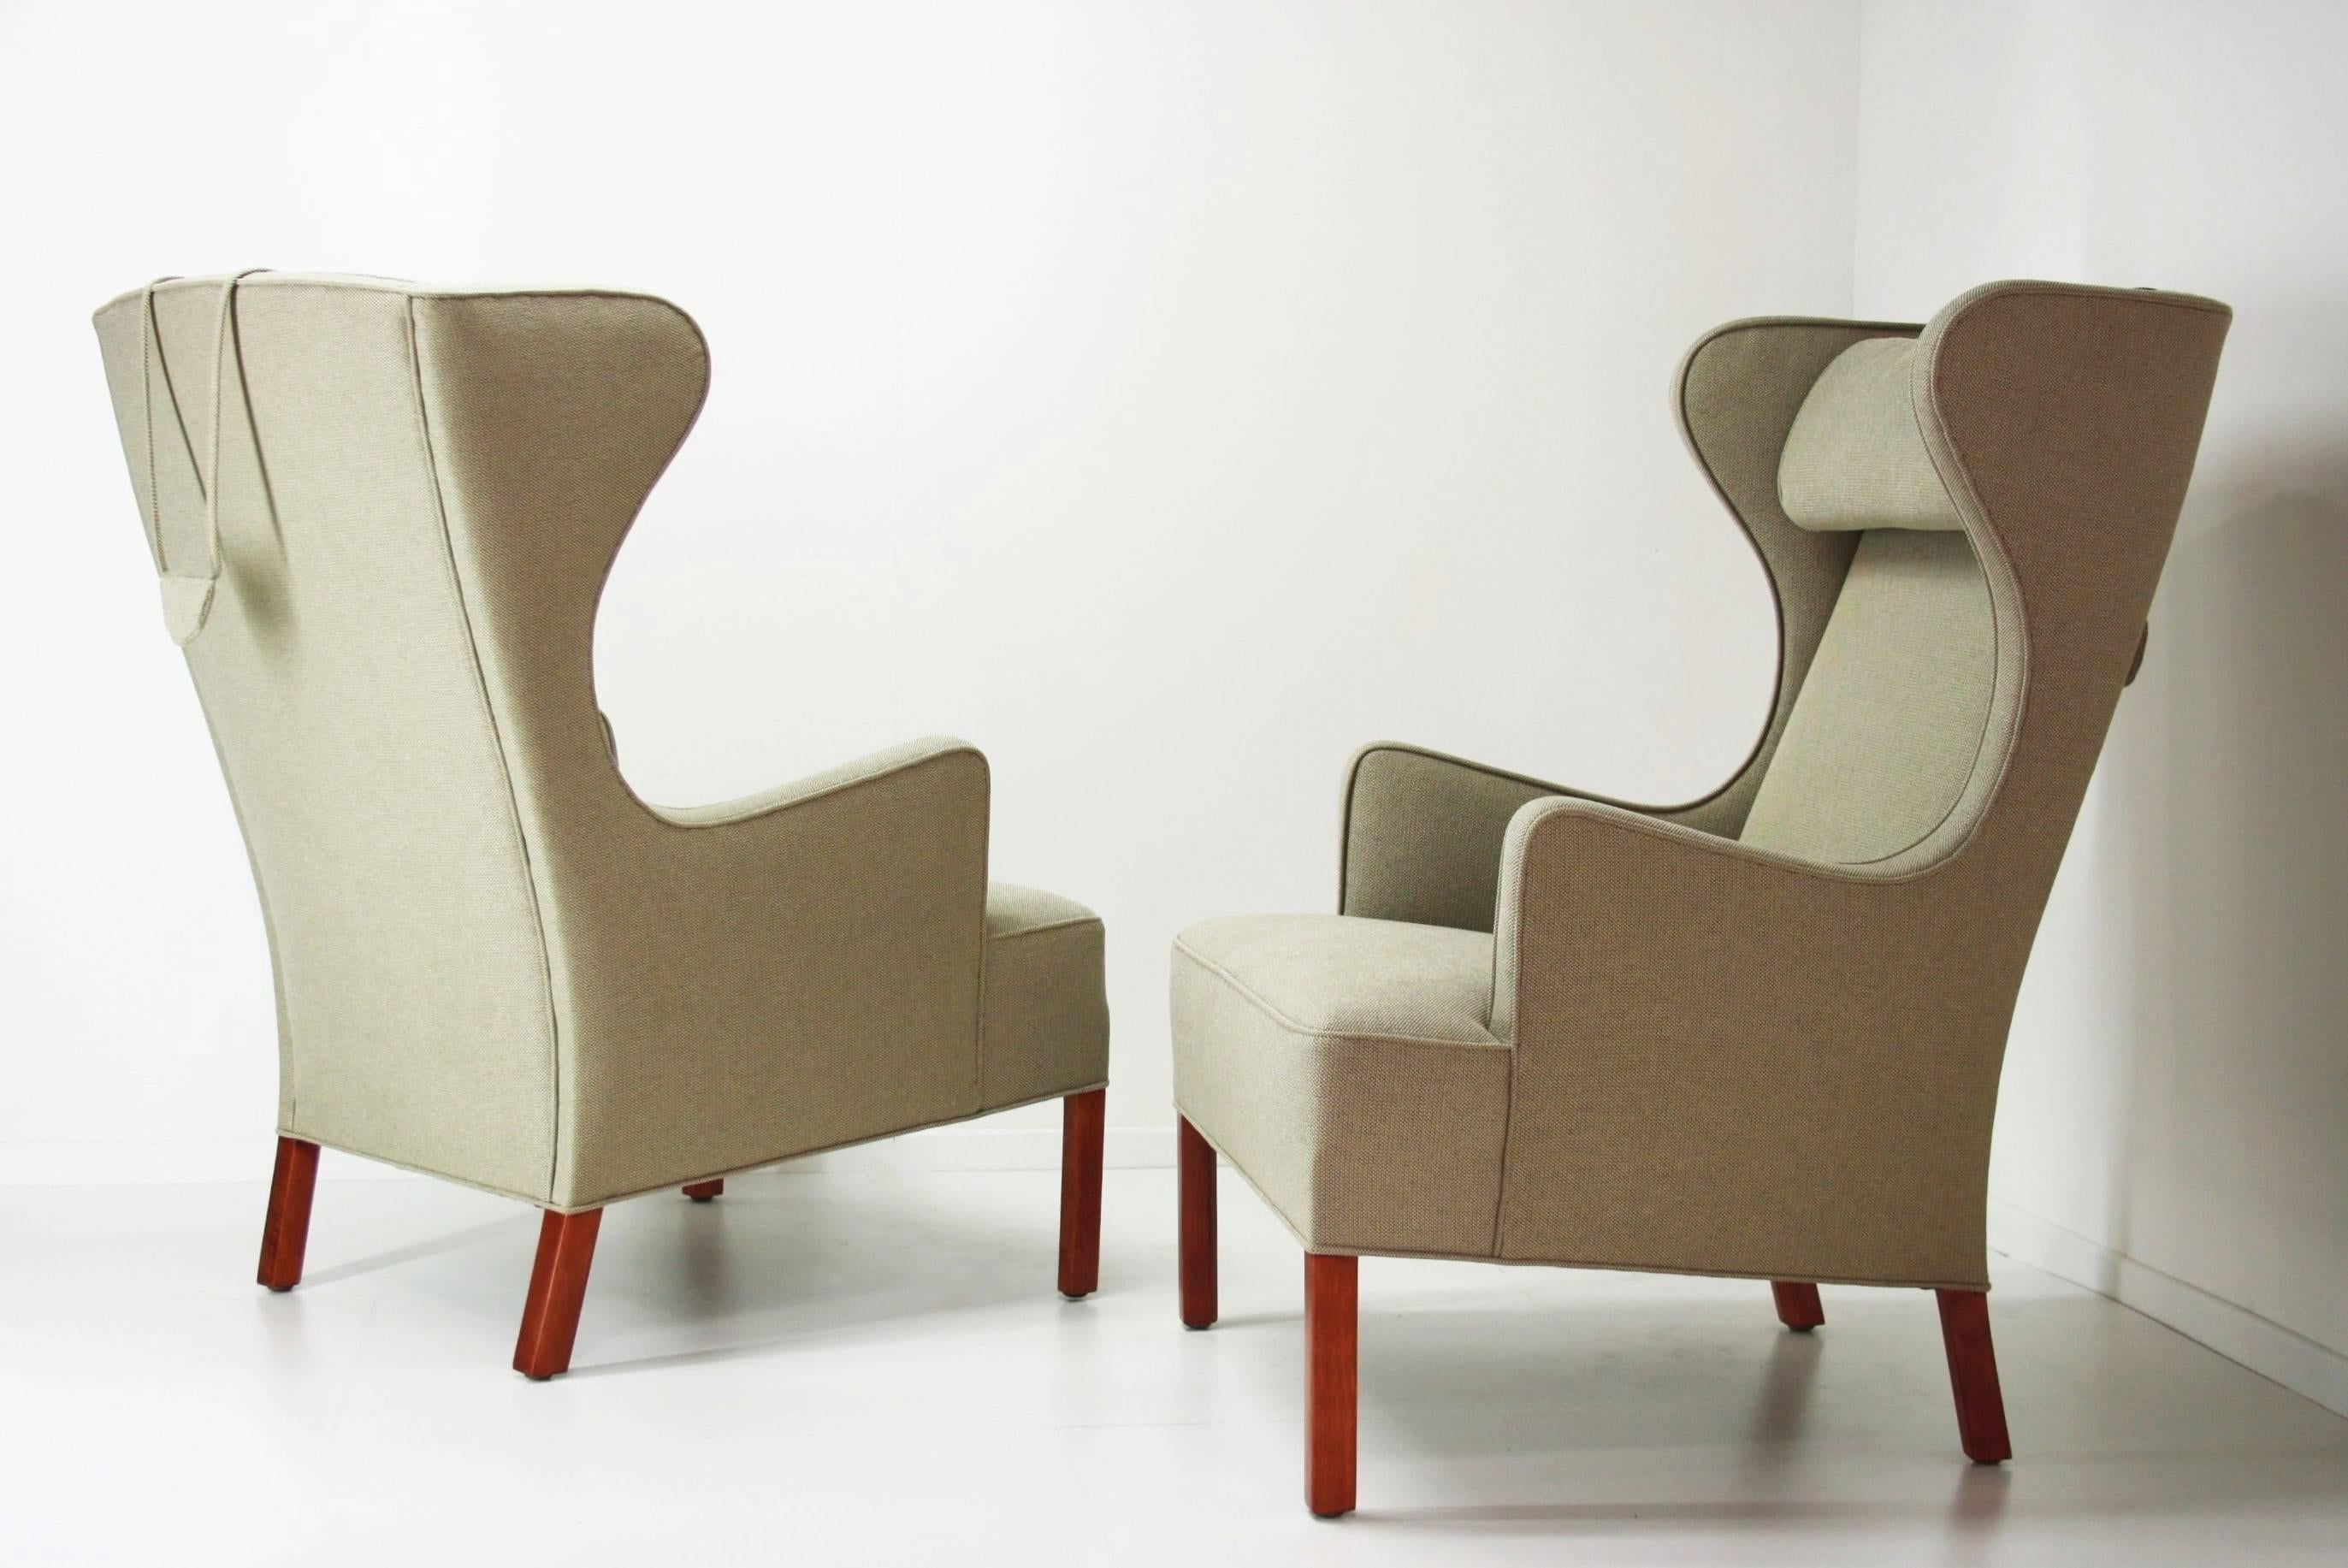 A very rare pair of wing chairs designed by Hans Wegner in 1945 and manufactured by Johannes Hansen.
This design dates from his early period and was only made in a limited edition. 
These chairs have been completely restored and reupholstered with a